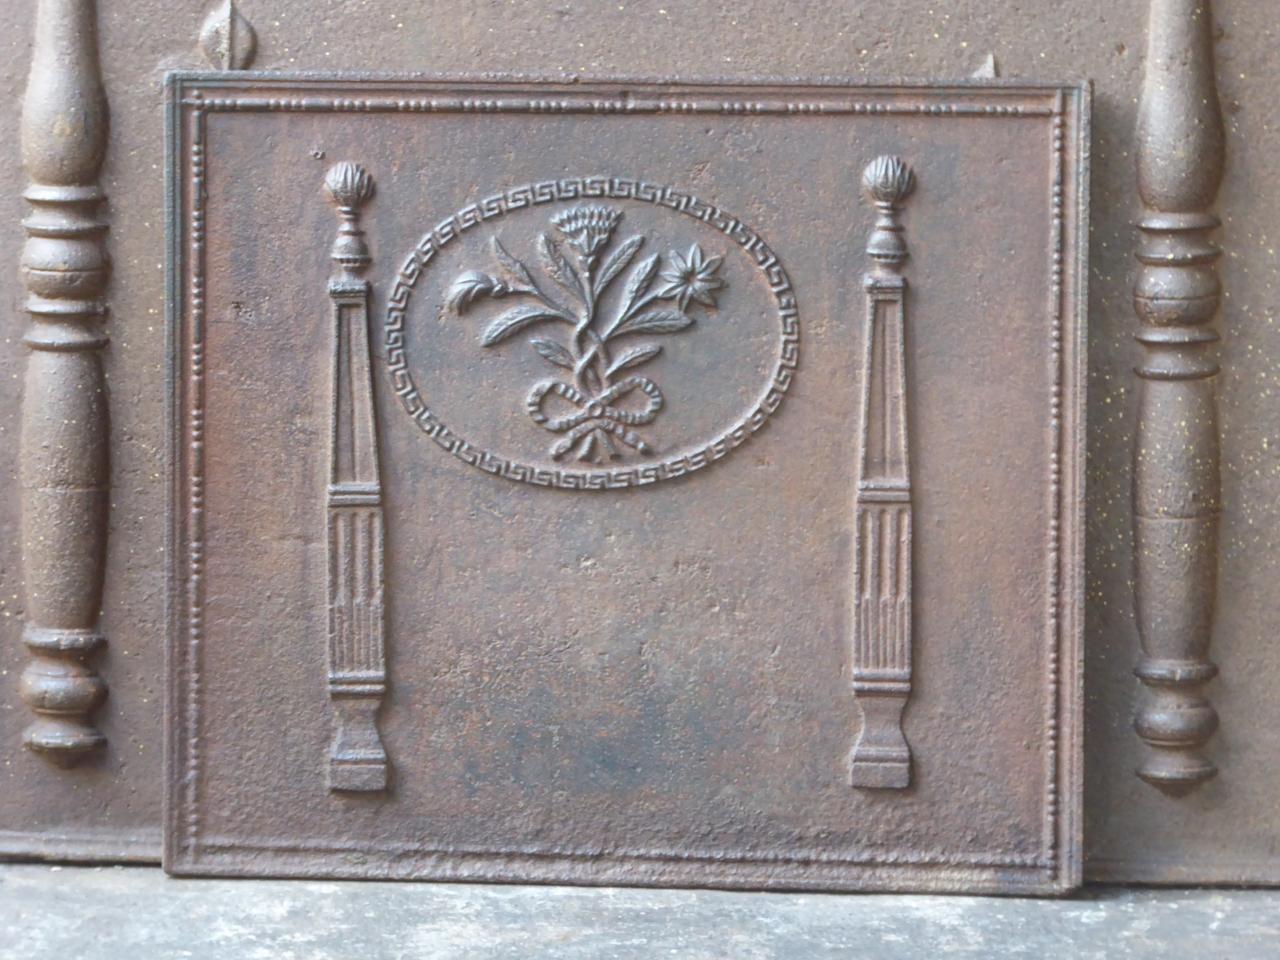 19th century French neoclassical fireback with two pillars and a floral decoration. The pillars stand for freedom, one of the three values of the French revolution.

The fireback is made of cast iron and has a natural brown patina. Upon request it